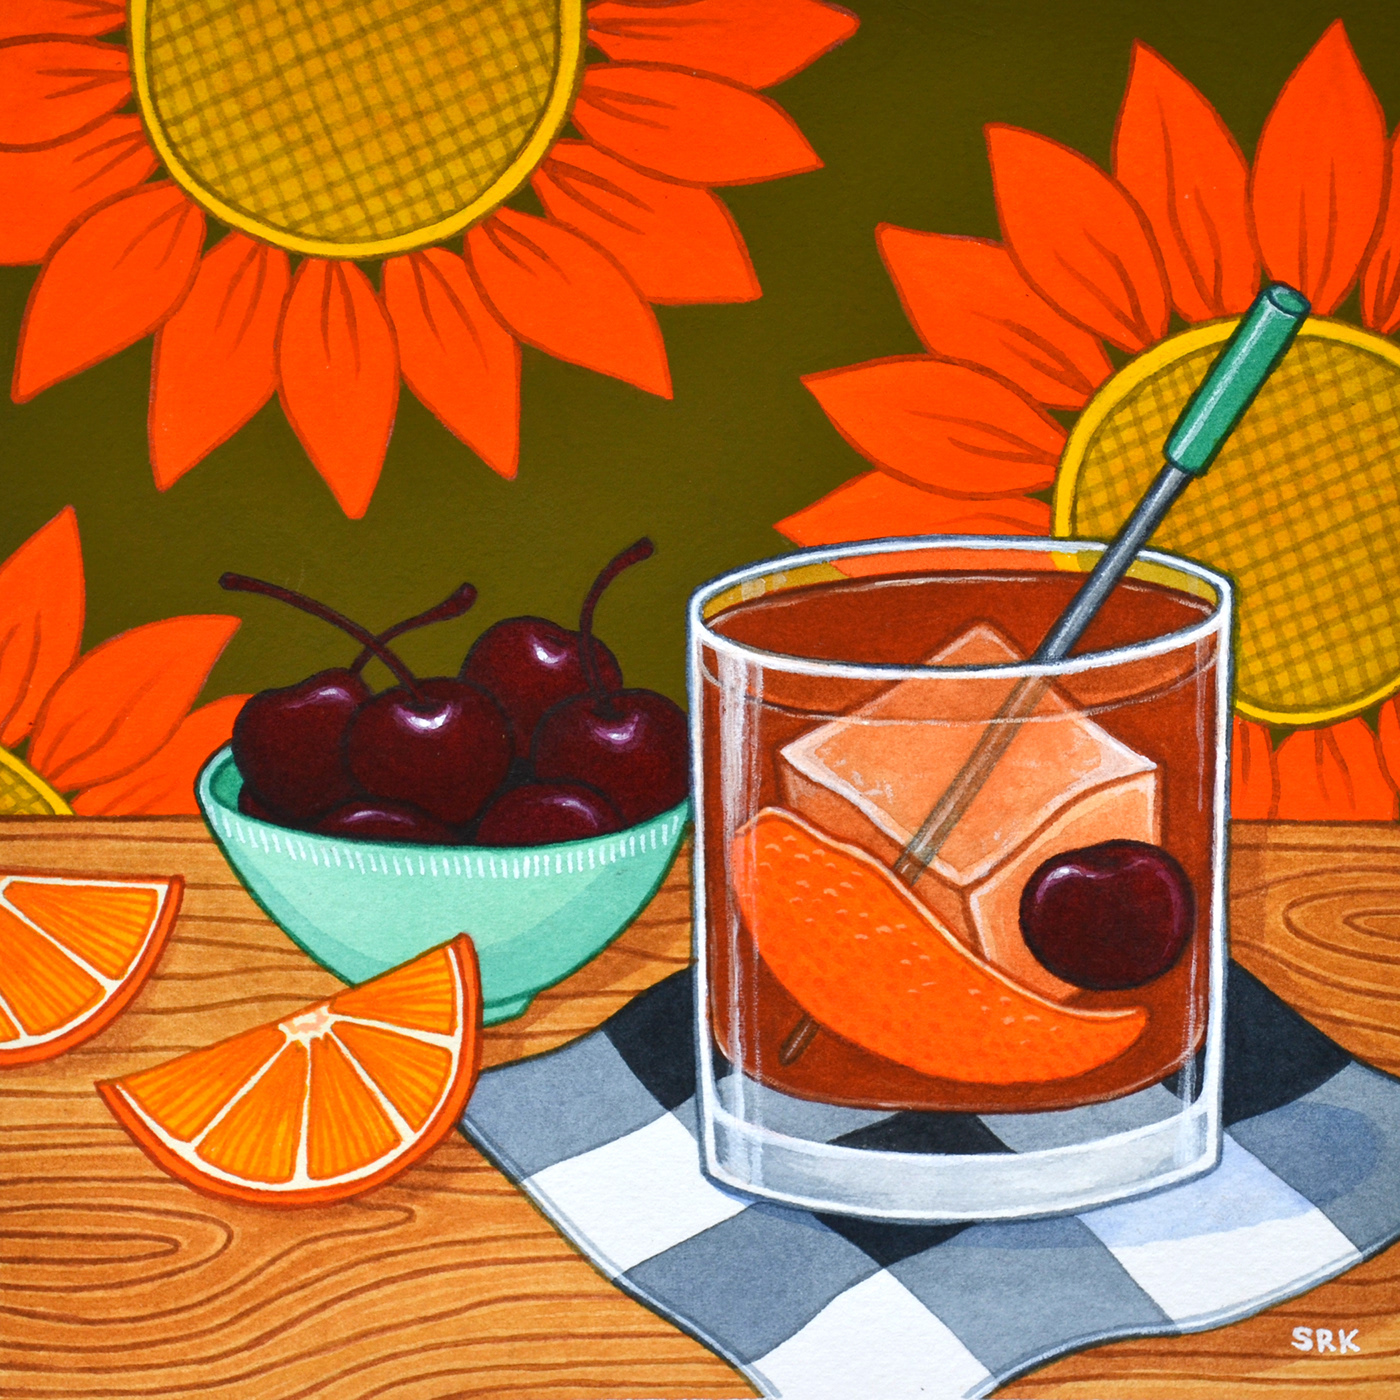 Whiskey whiskey old fashioned old fashioned cocktail Mixology food illustration drink